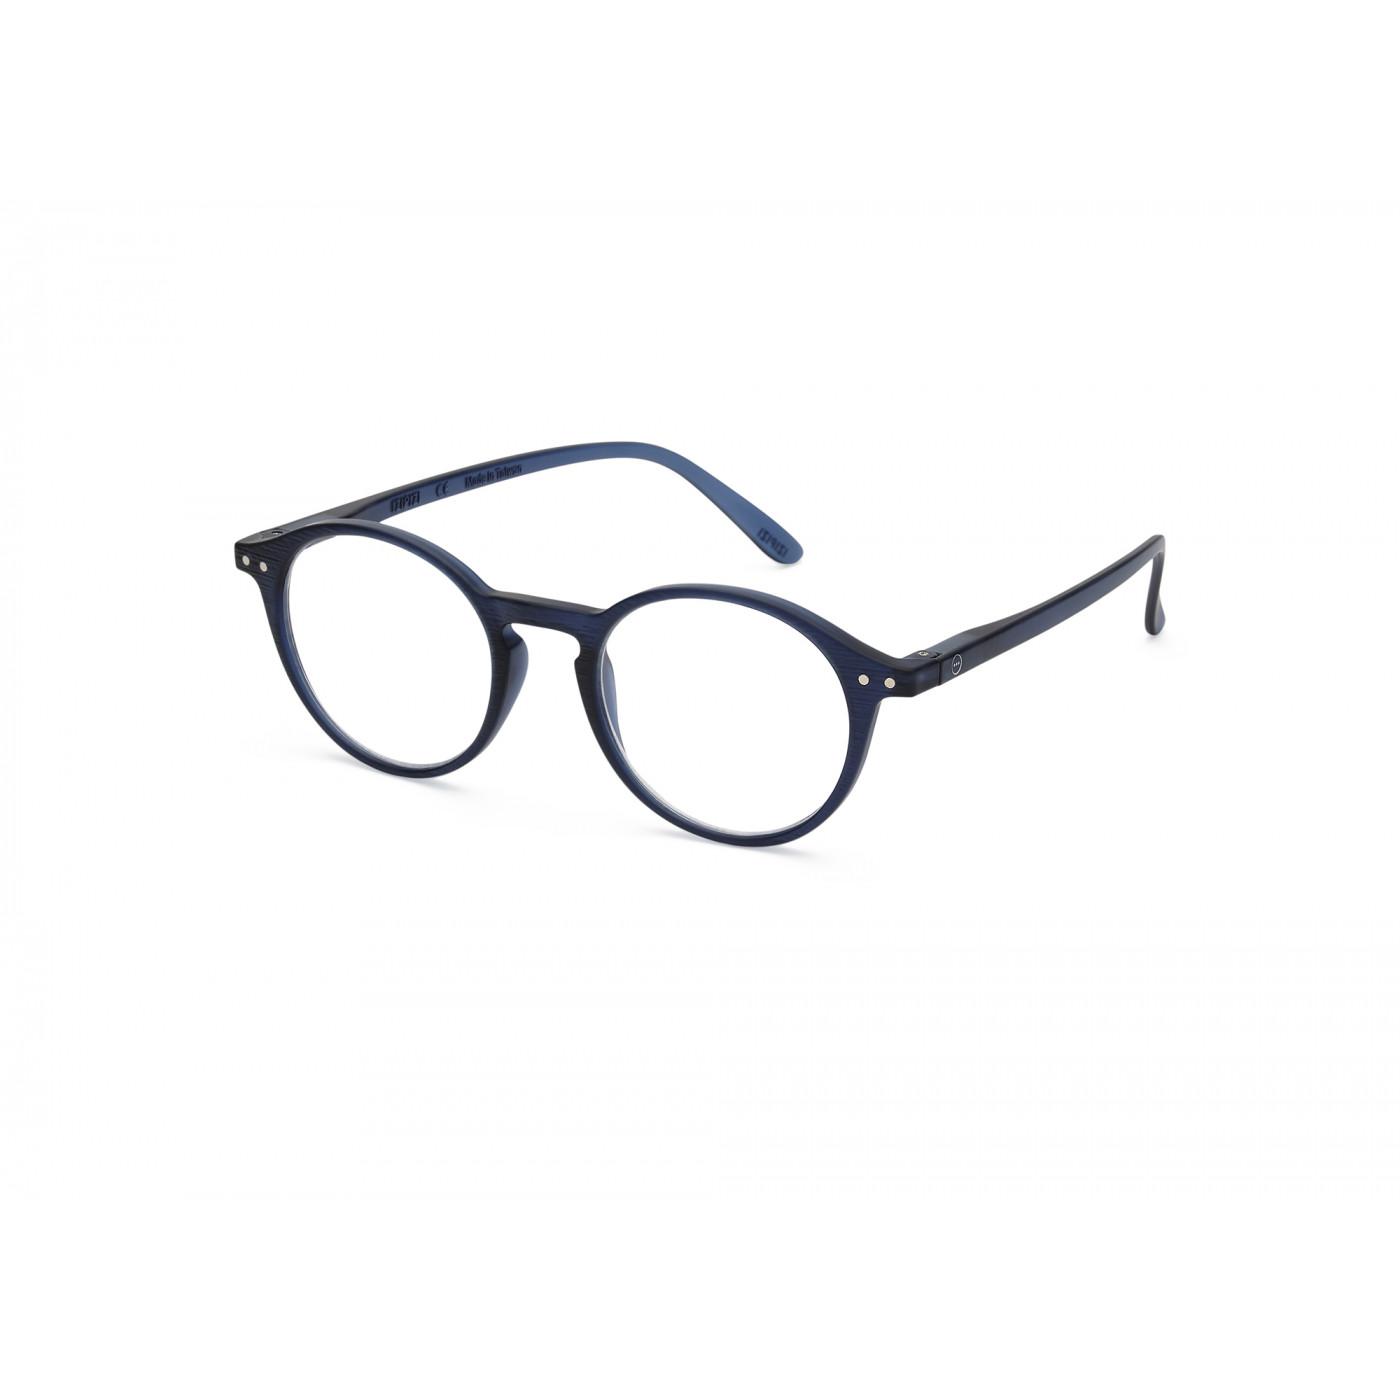 reaging glasses frame D deep Blue by Izipizi essentia Collection